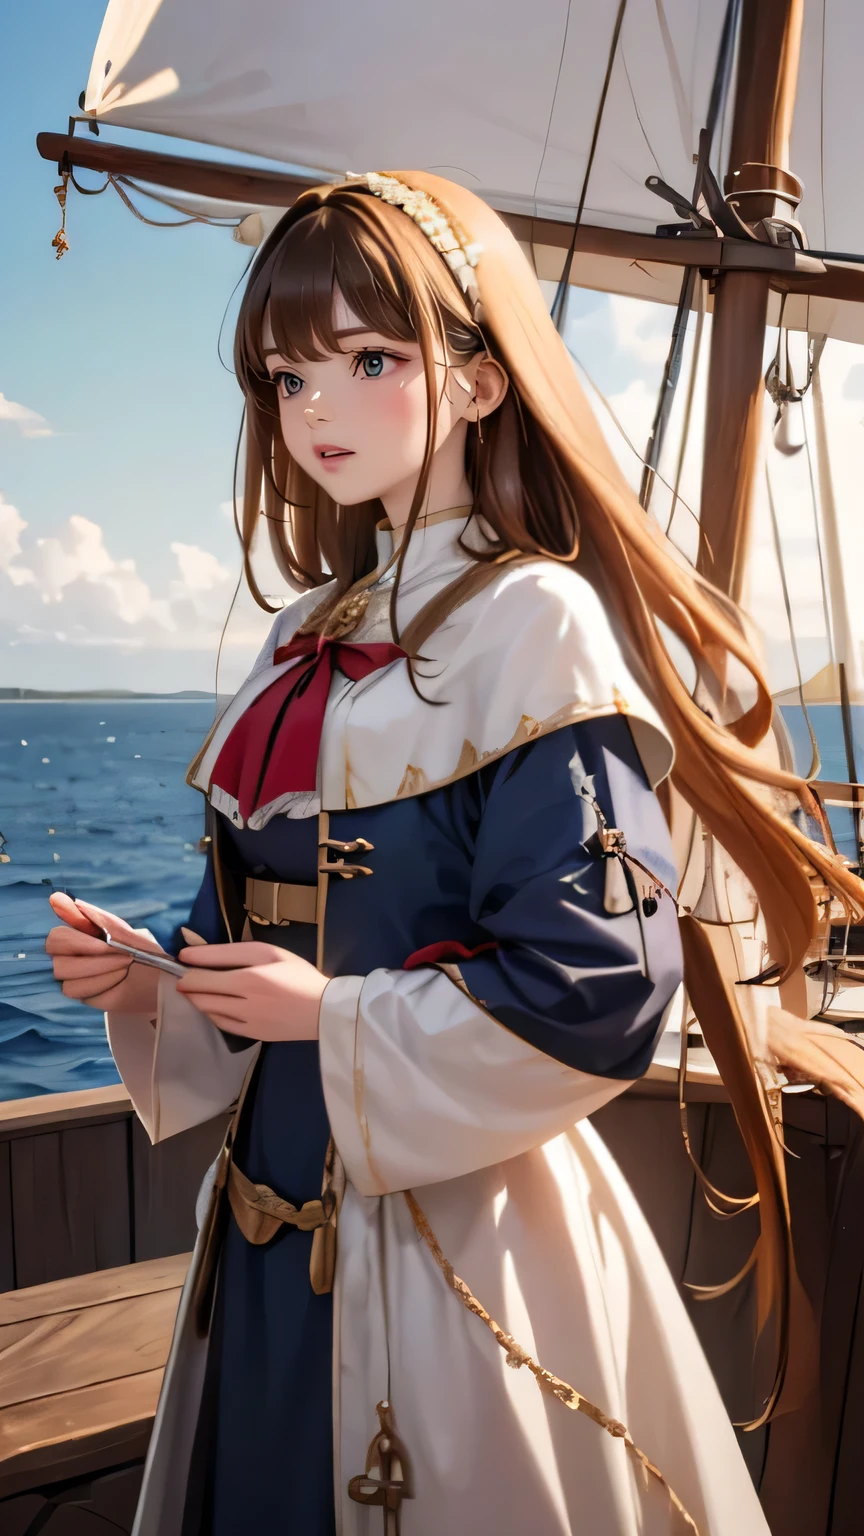 ((medieval world)), (noble's daughter, medieval European aristocratic dress), on the deck of a medieval large galleon during the Age of Discovery in the Middle Ages, sailors, a lot of cargo,